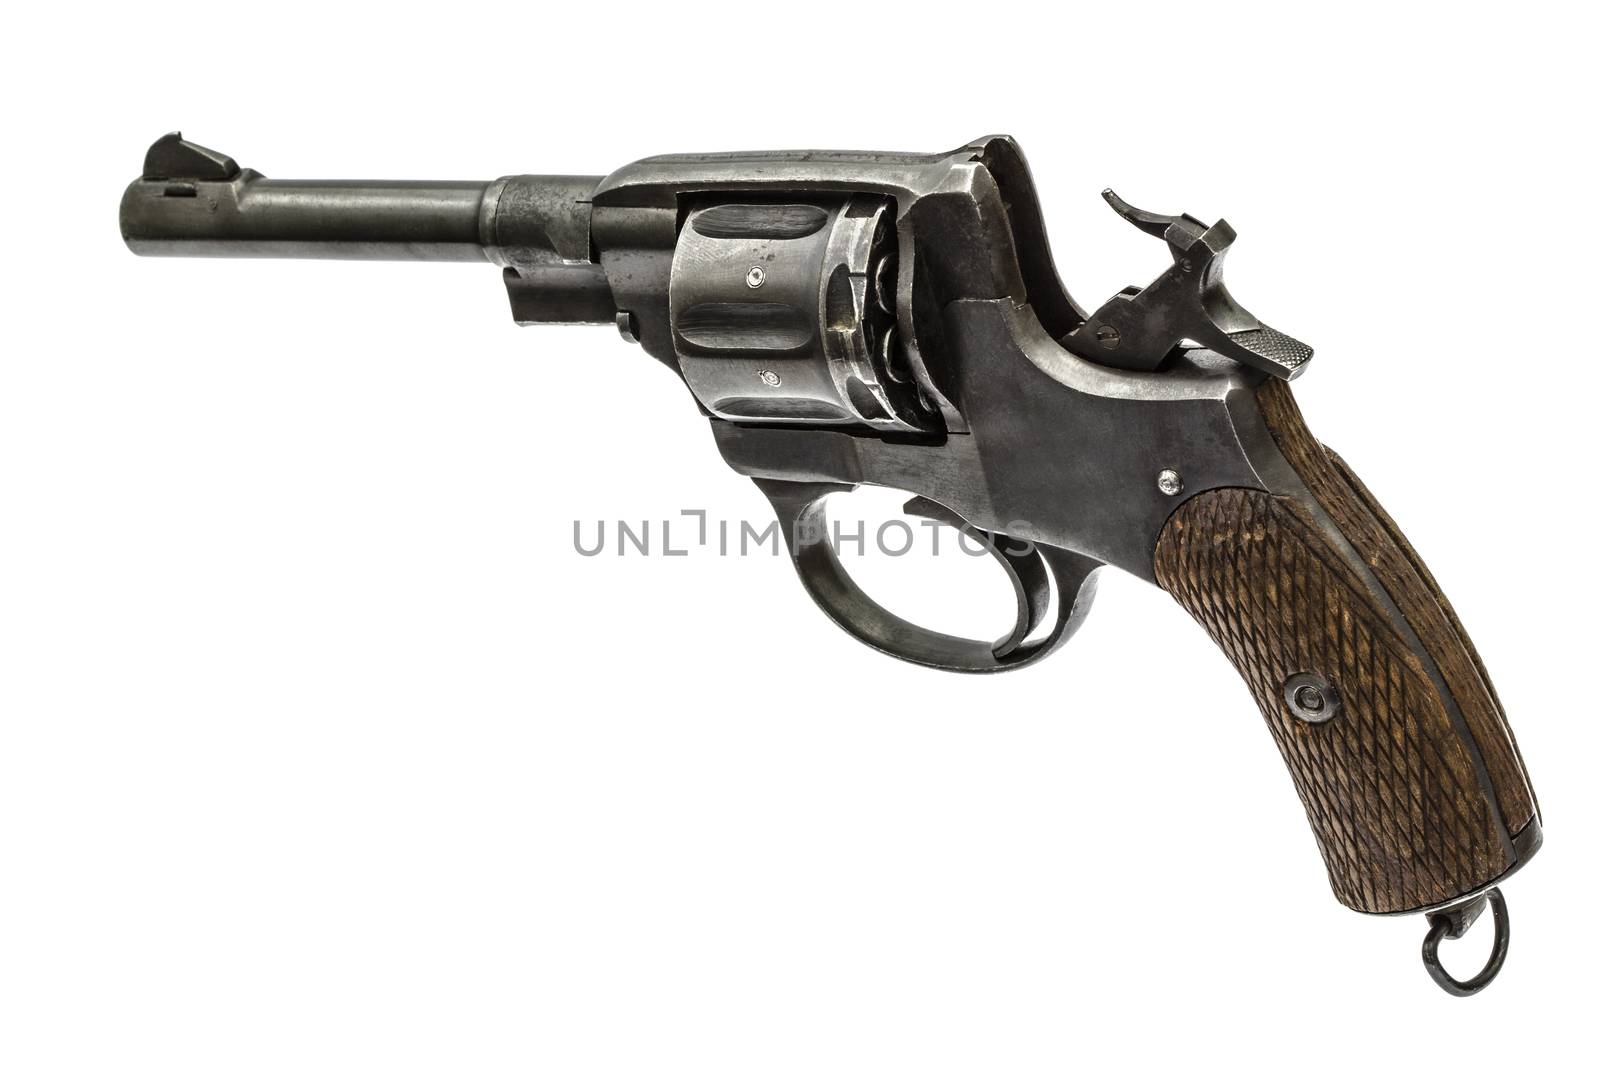 Old pistol with the hammer cocked, isolated on white background